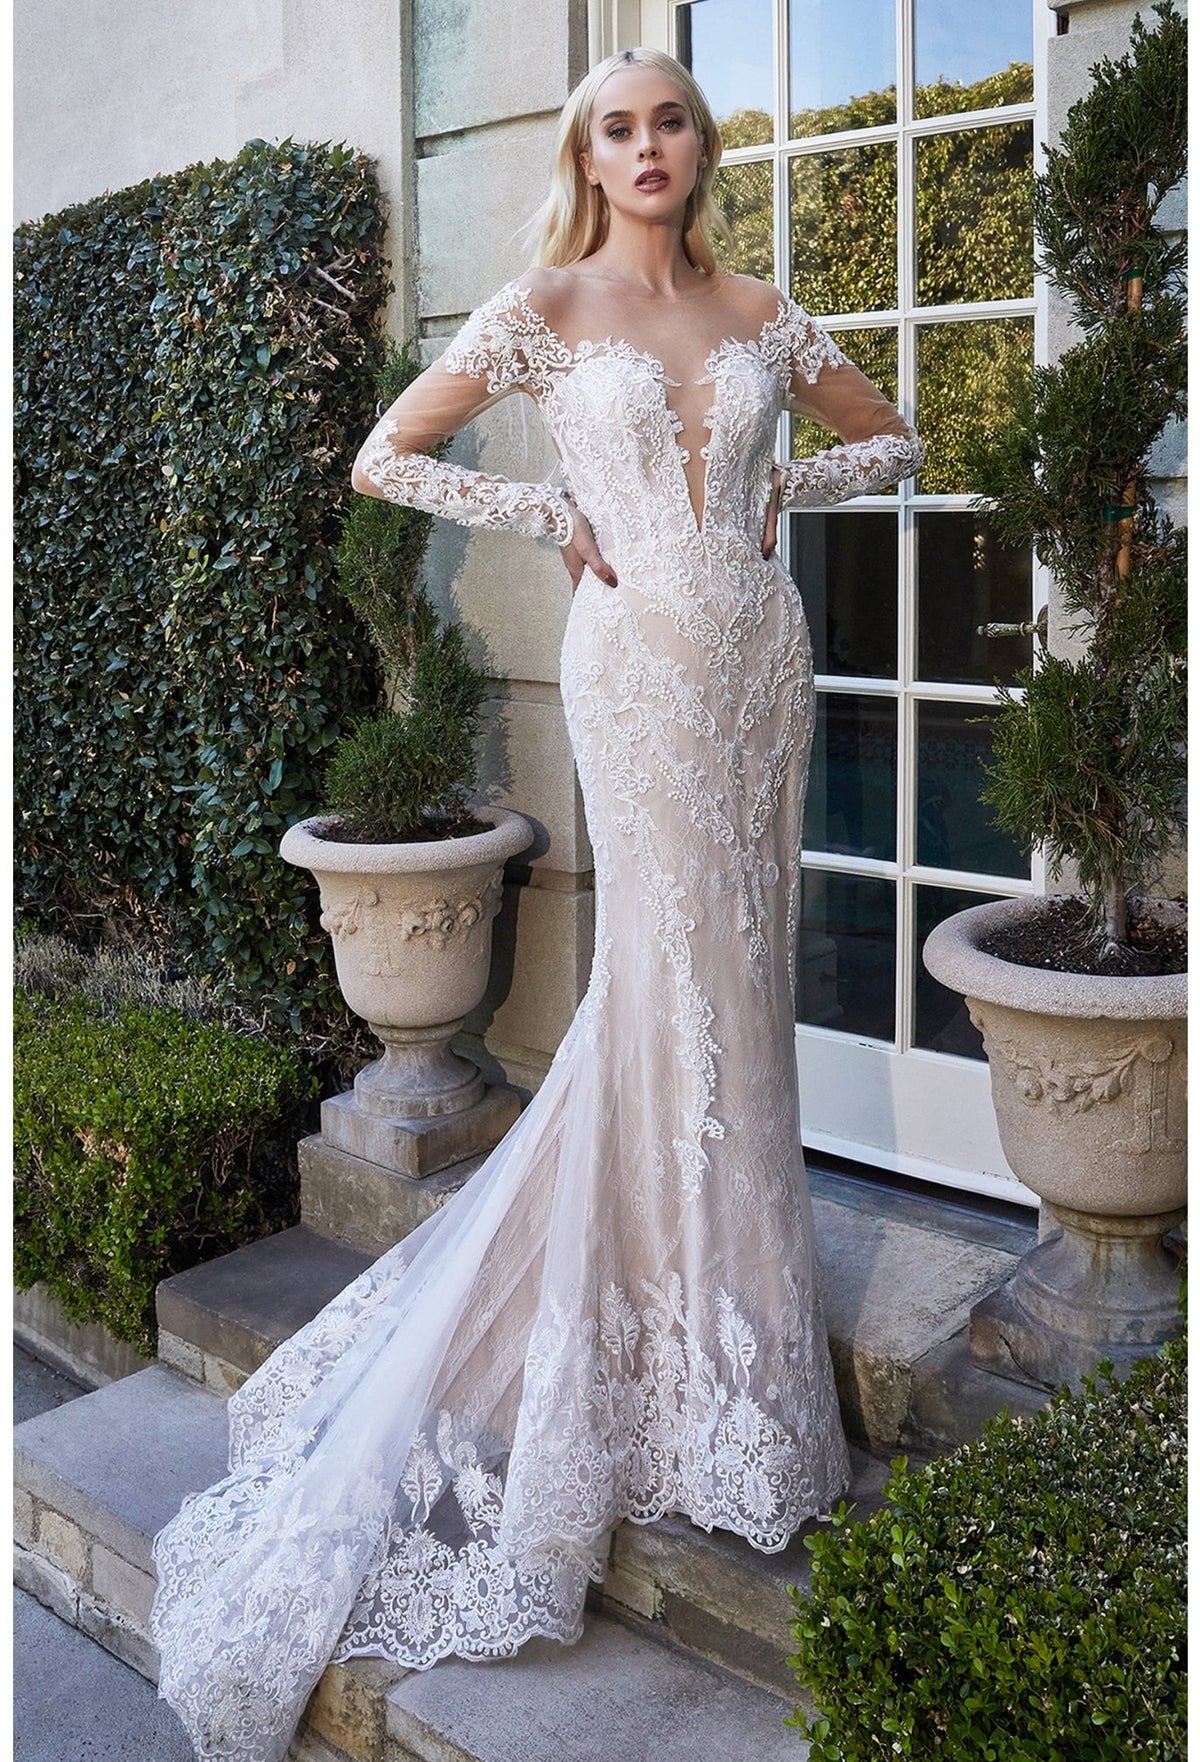 Gorgeous Lace Mermaid Fitted Fit and Flare Wedding Dress Bridal Gown Long Sleeve Deep V Neckline Illusion lace Open Back Scalloped Hem